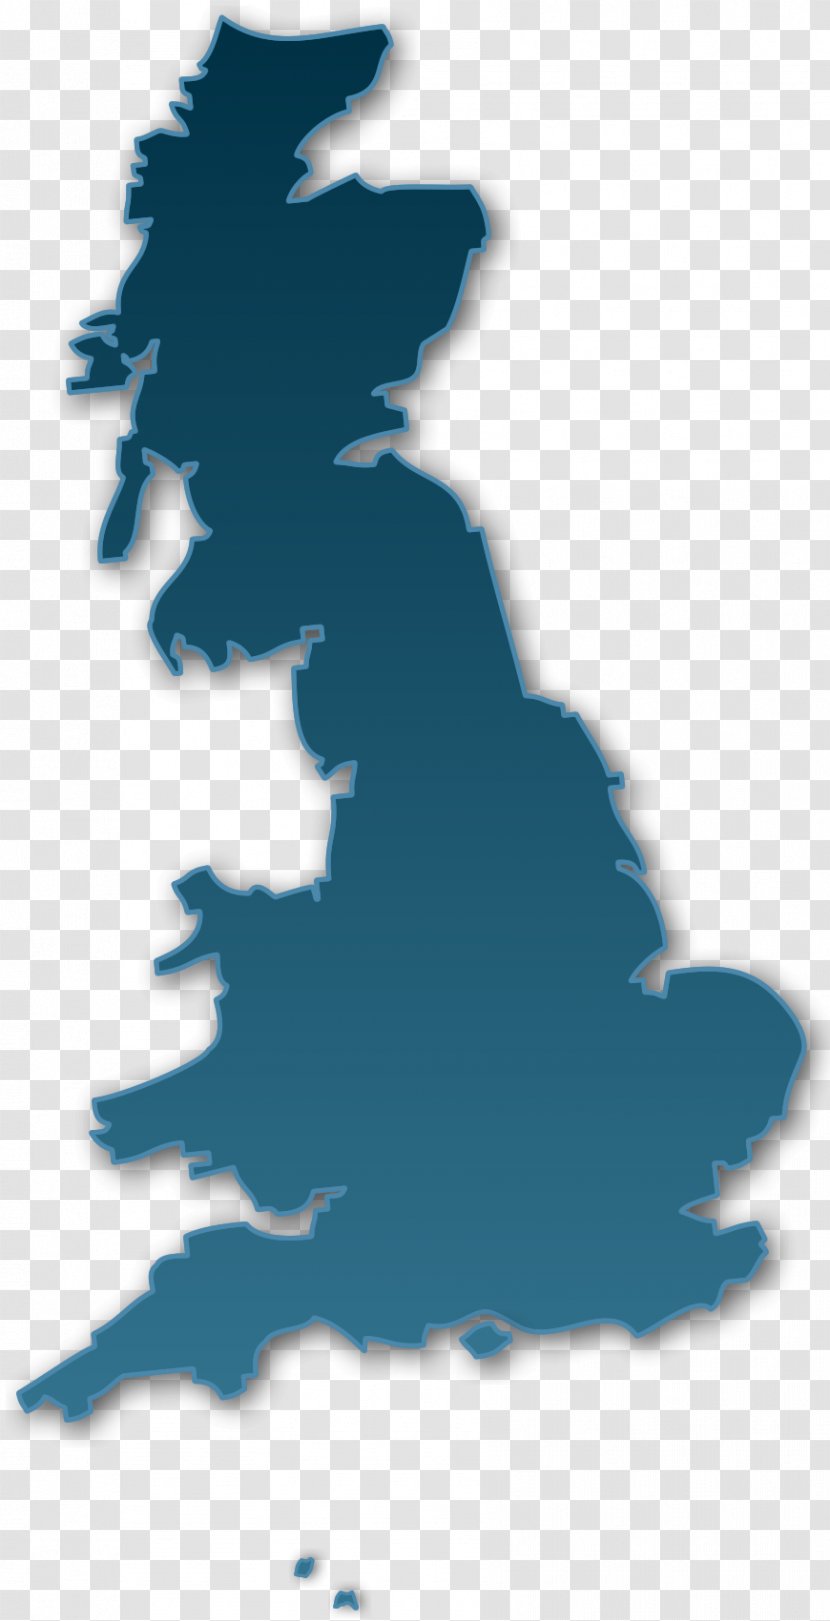 England The Barn Hotel British Isles Map Geography - Road - Uk Cliparts Transparent PNG